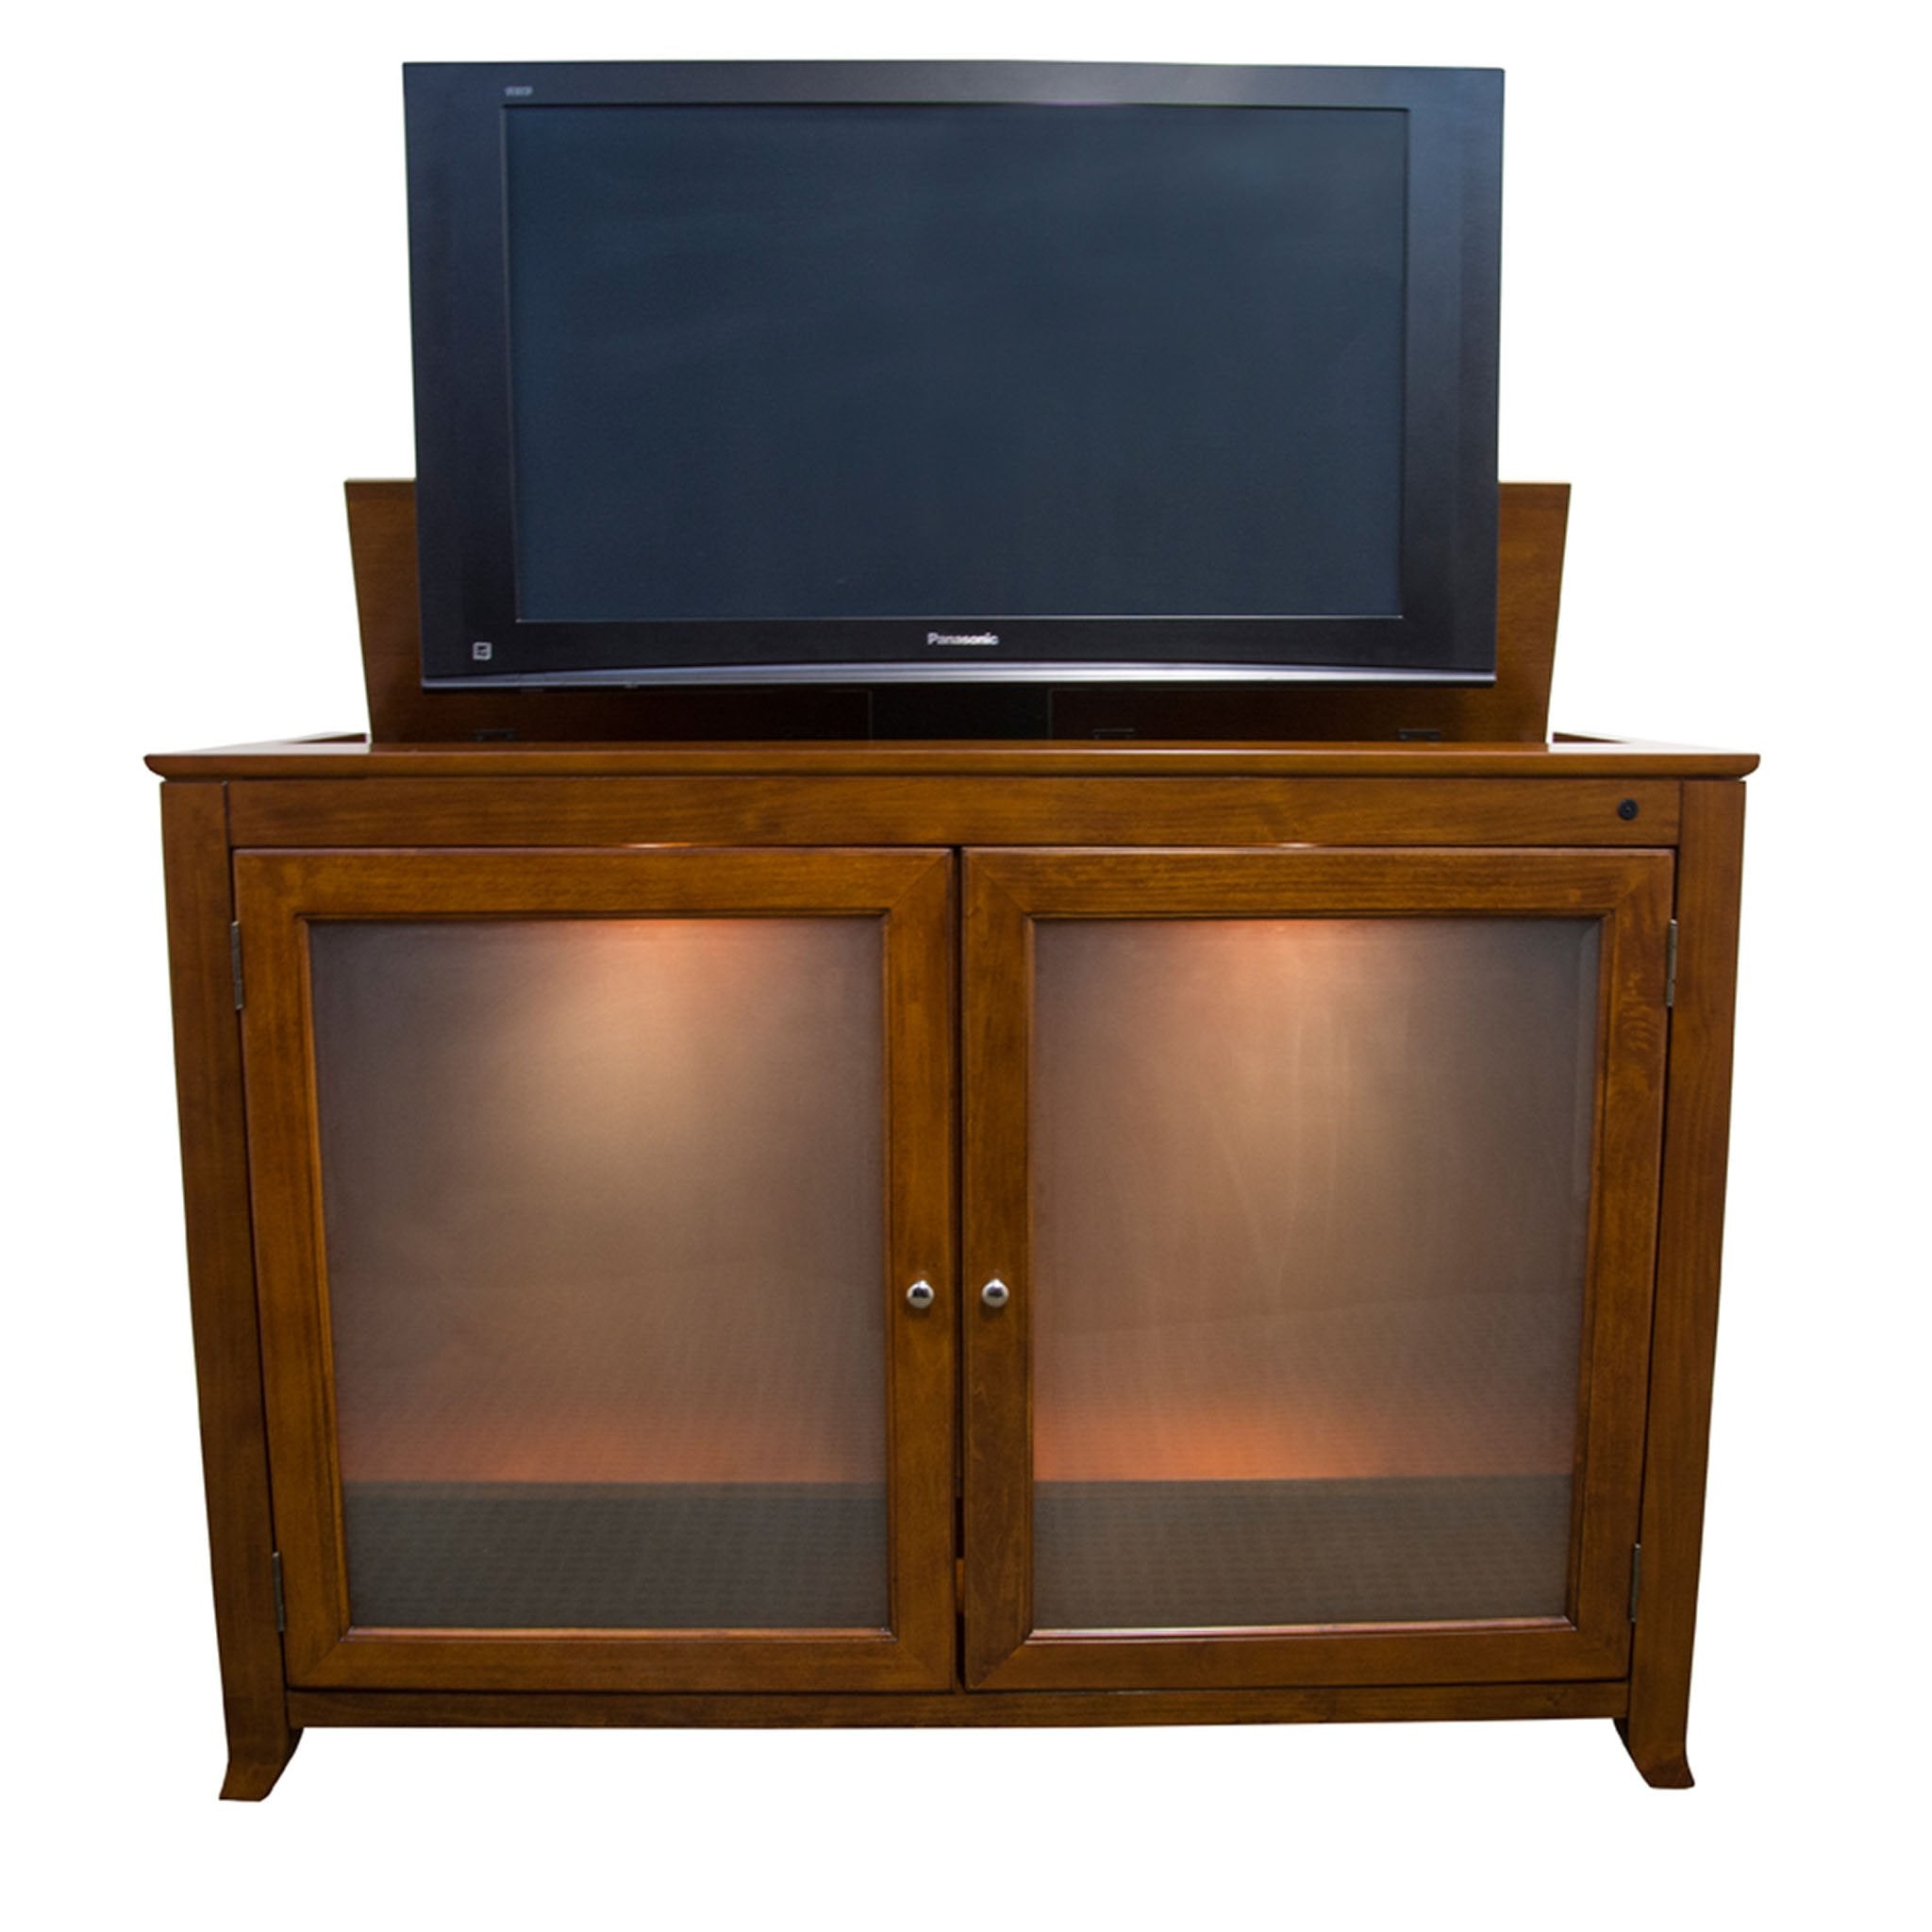 Touchstone 70054 Brookside Tv Lift Cabinet For Tvs Up To 60